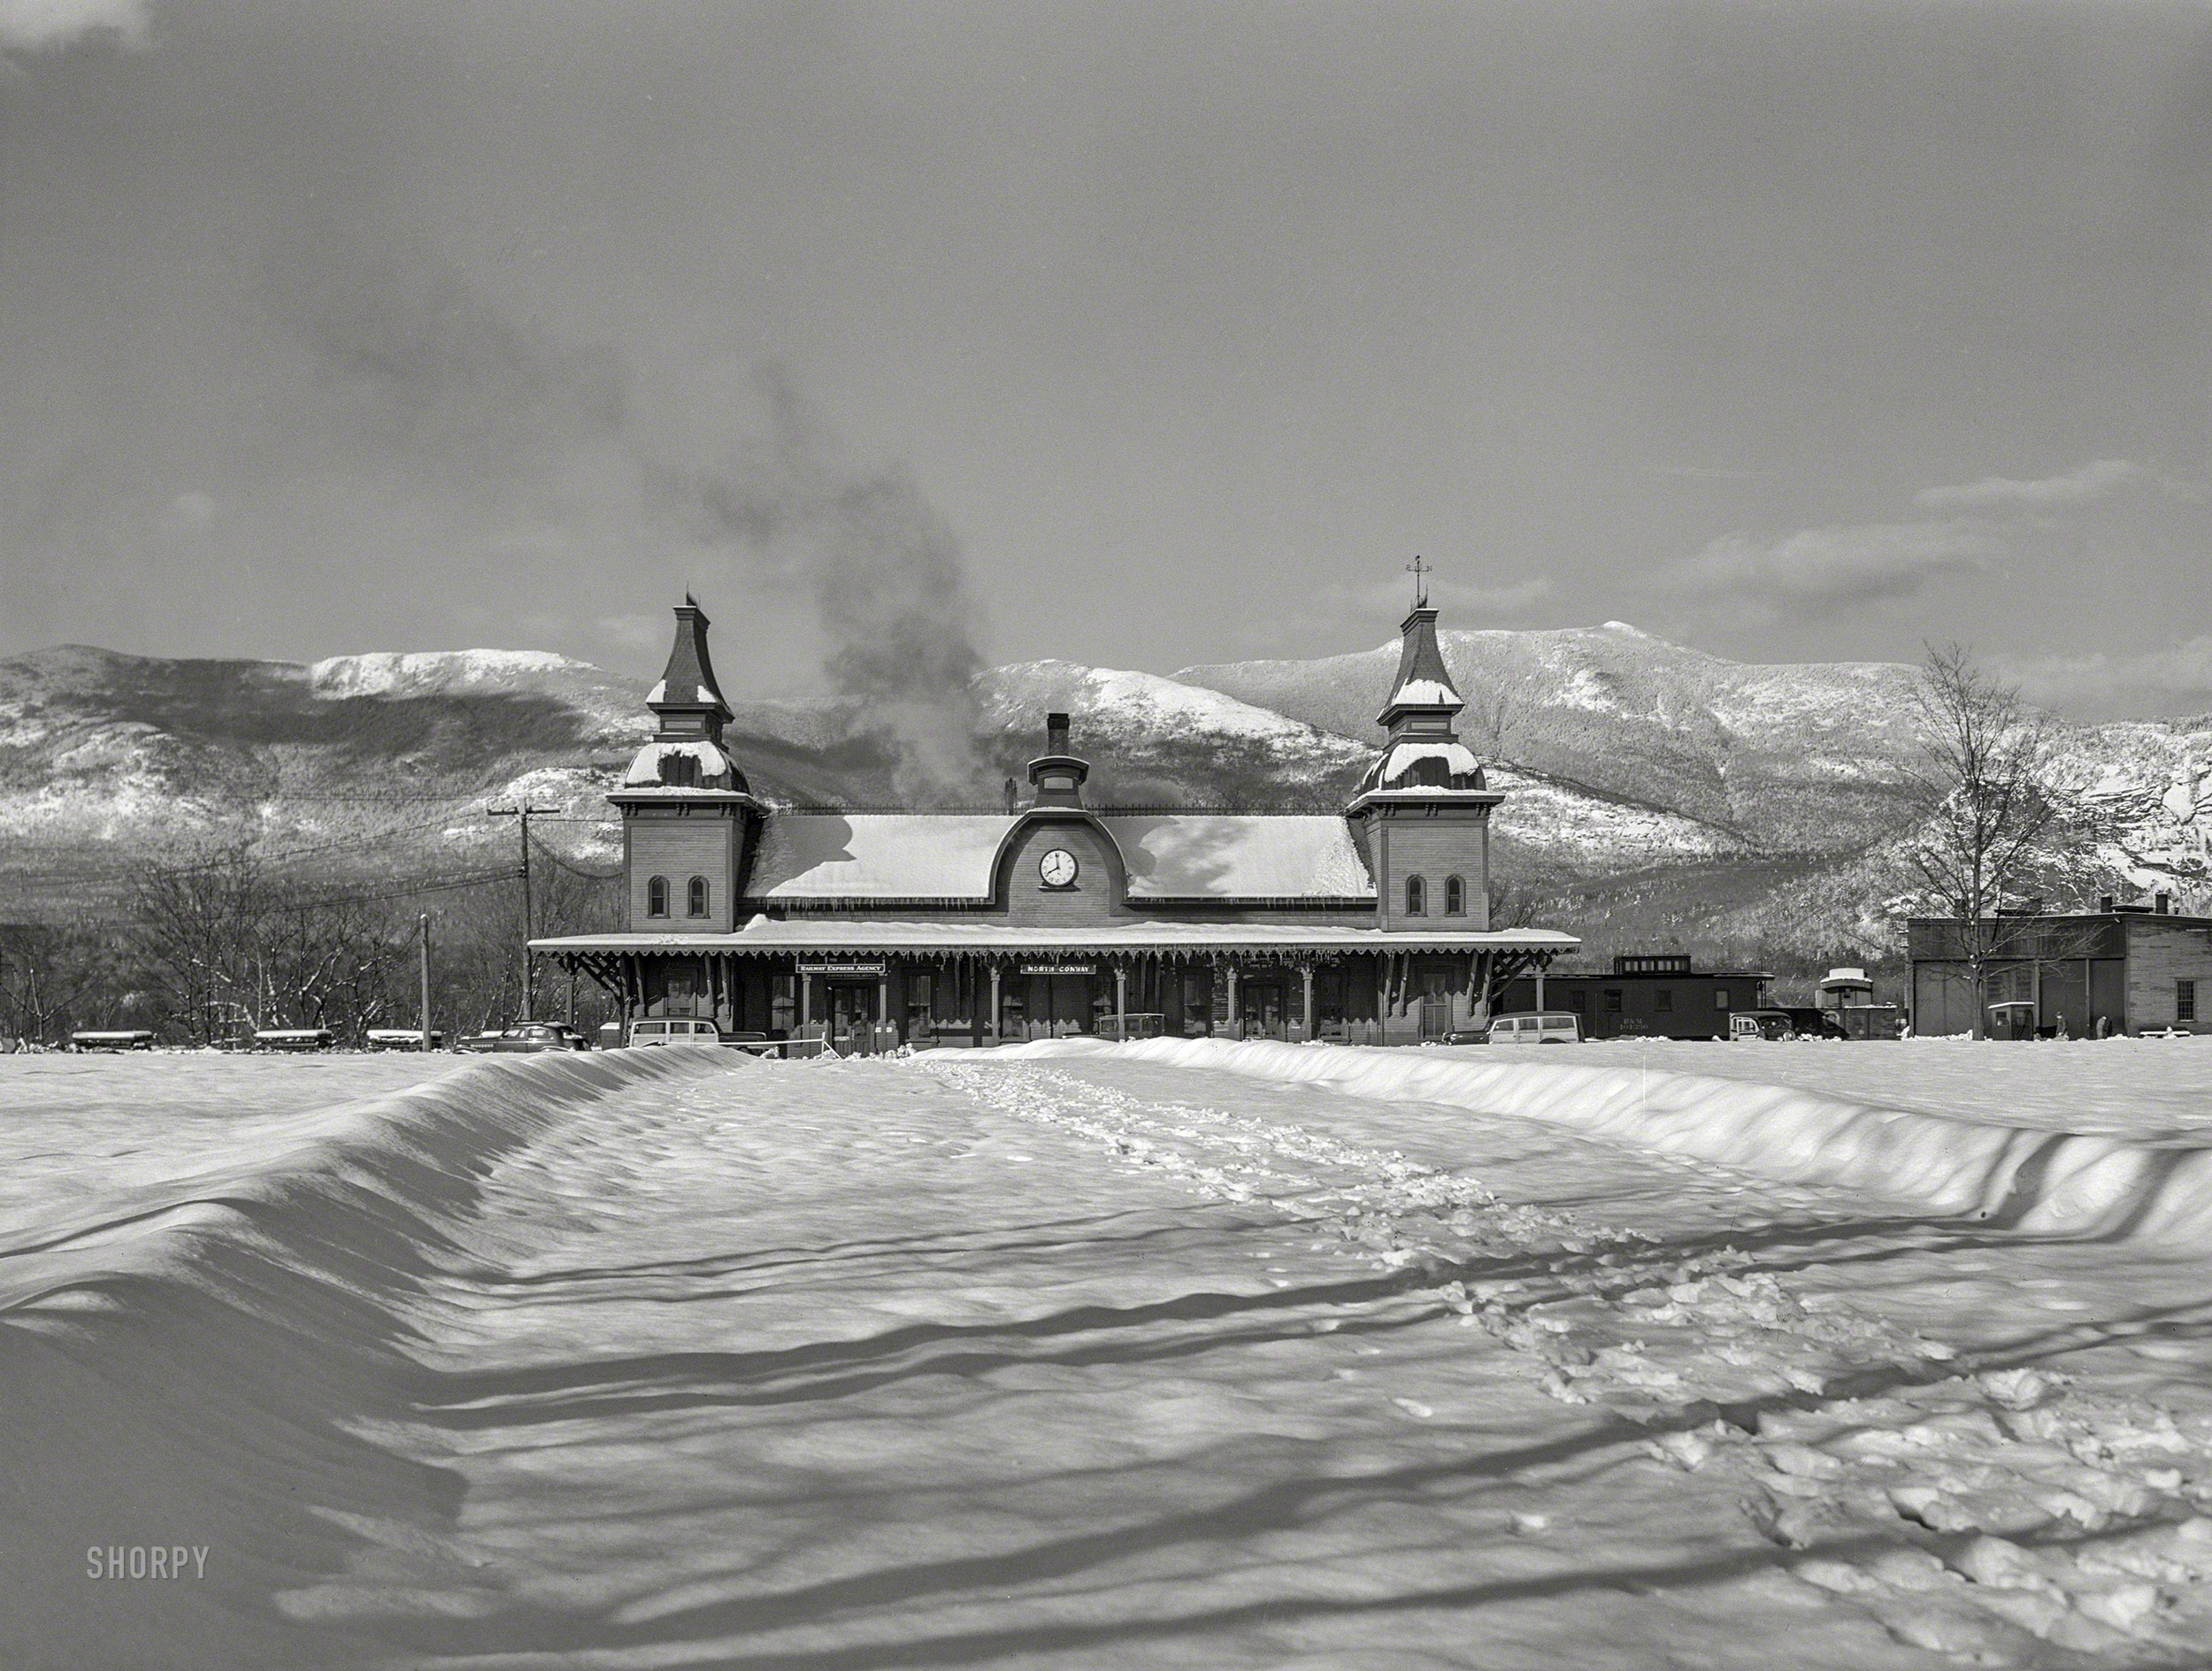 February 1940. "Railway station in North Conway, New Hampshire." Medium format acetate negative by Marion Post Wolcott for the Farm Security Administration. View full size.